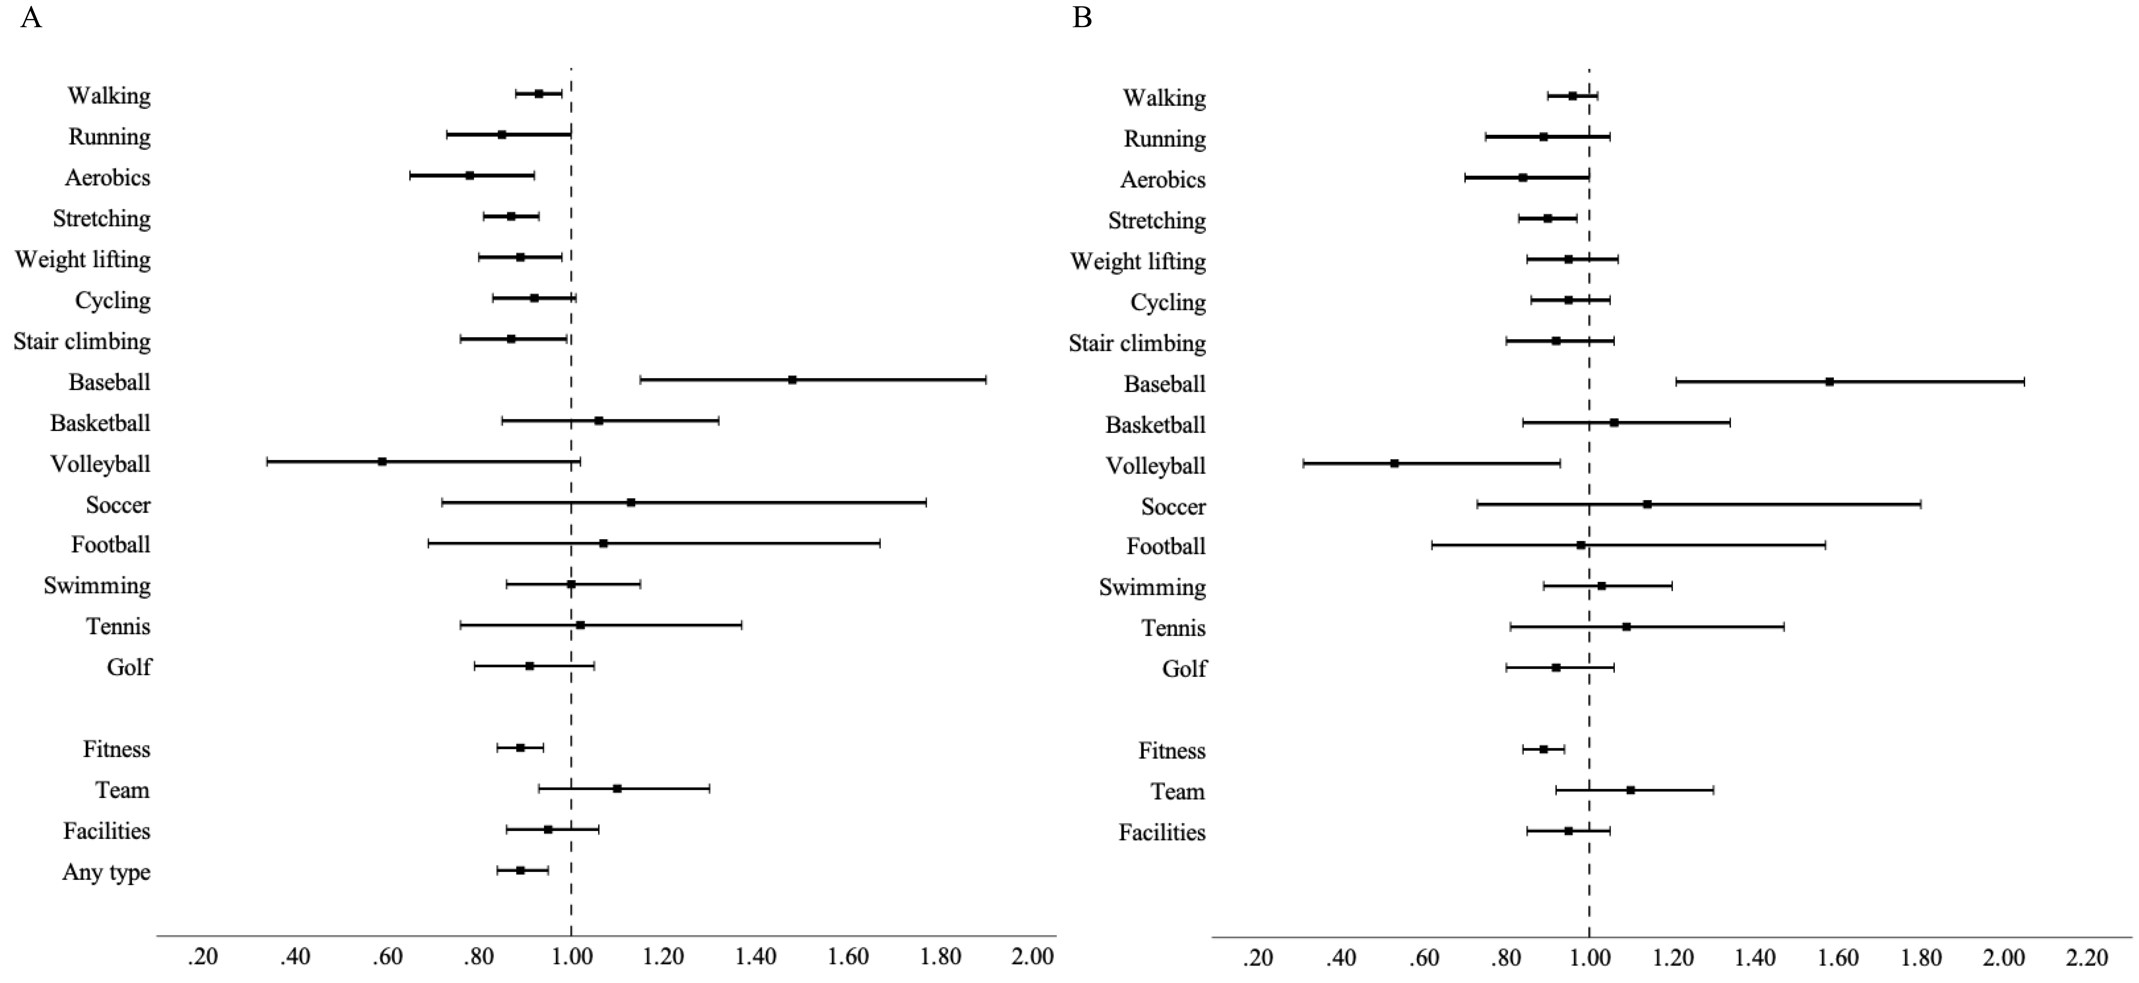 chart showing how different exercises affect mortality rates